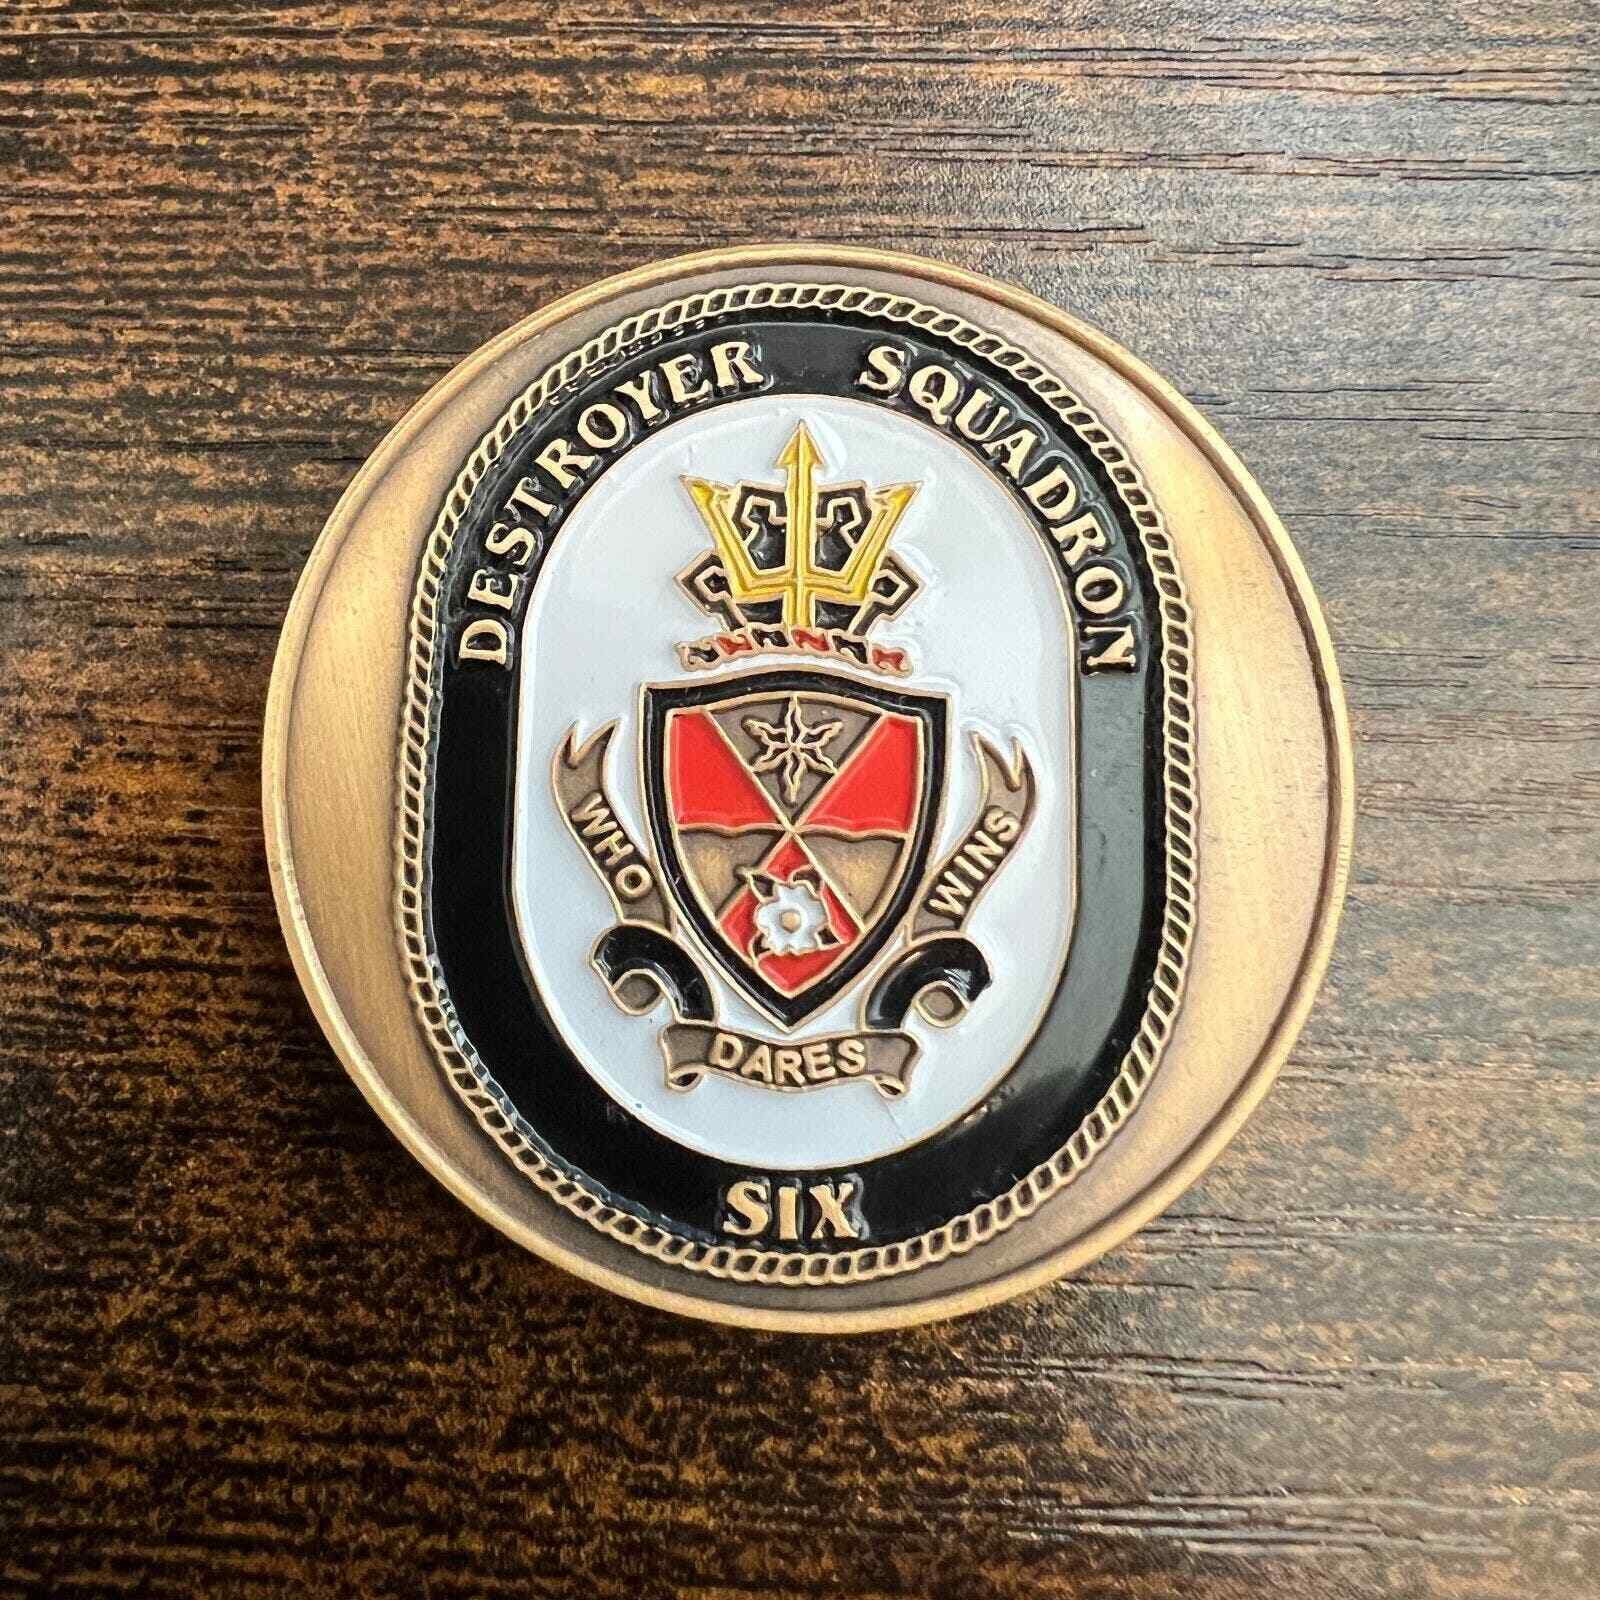 United States Navy Military Destroyer Squadron Six Metal Coin